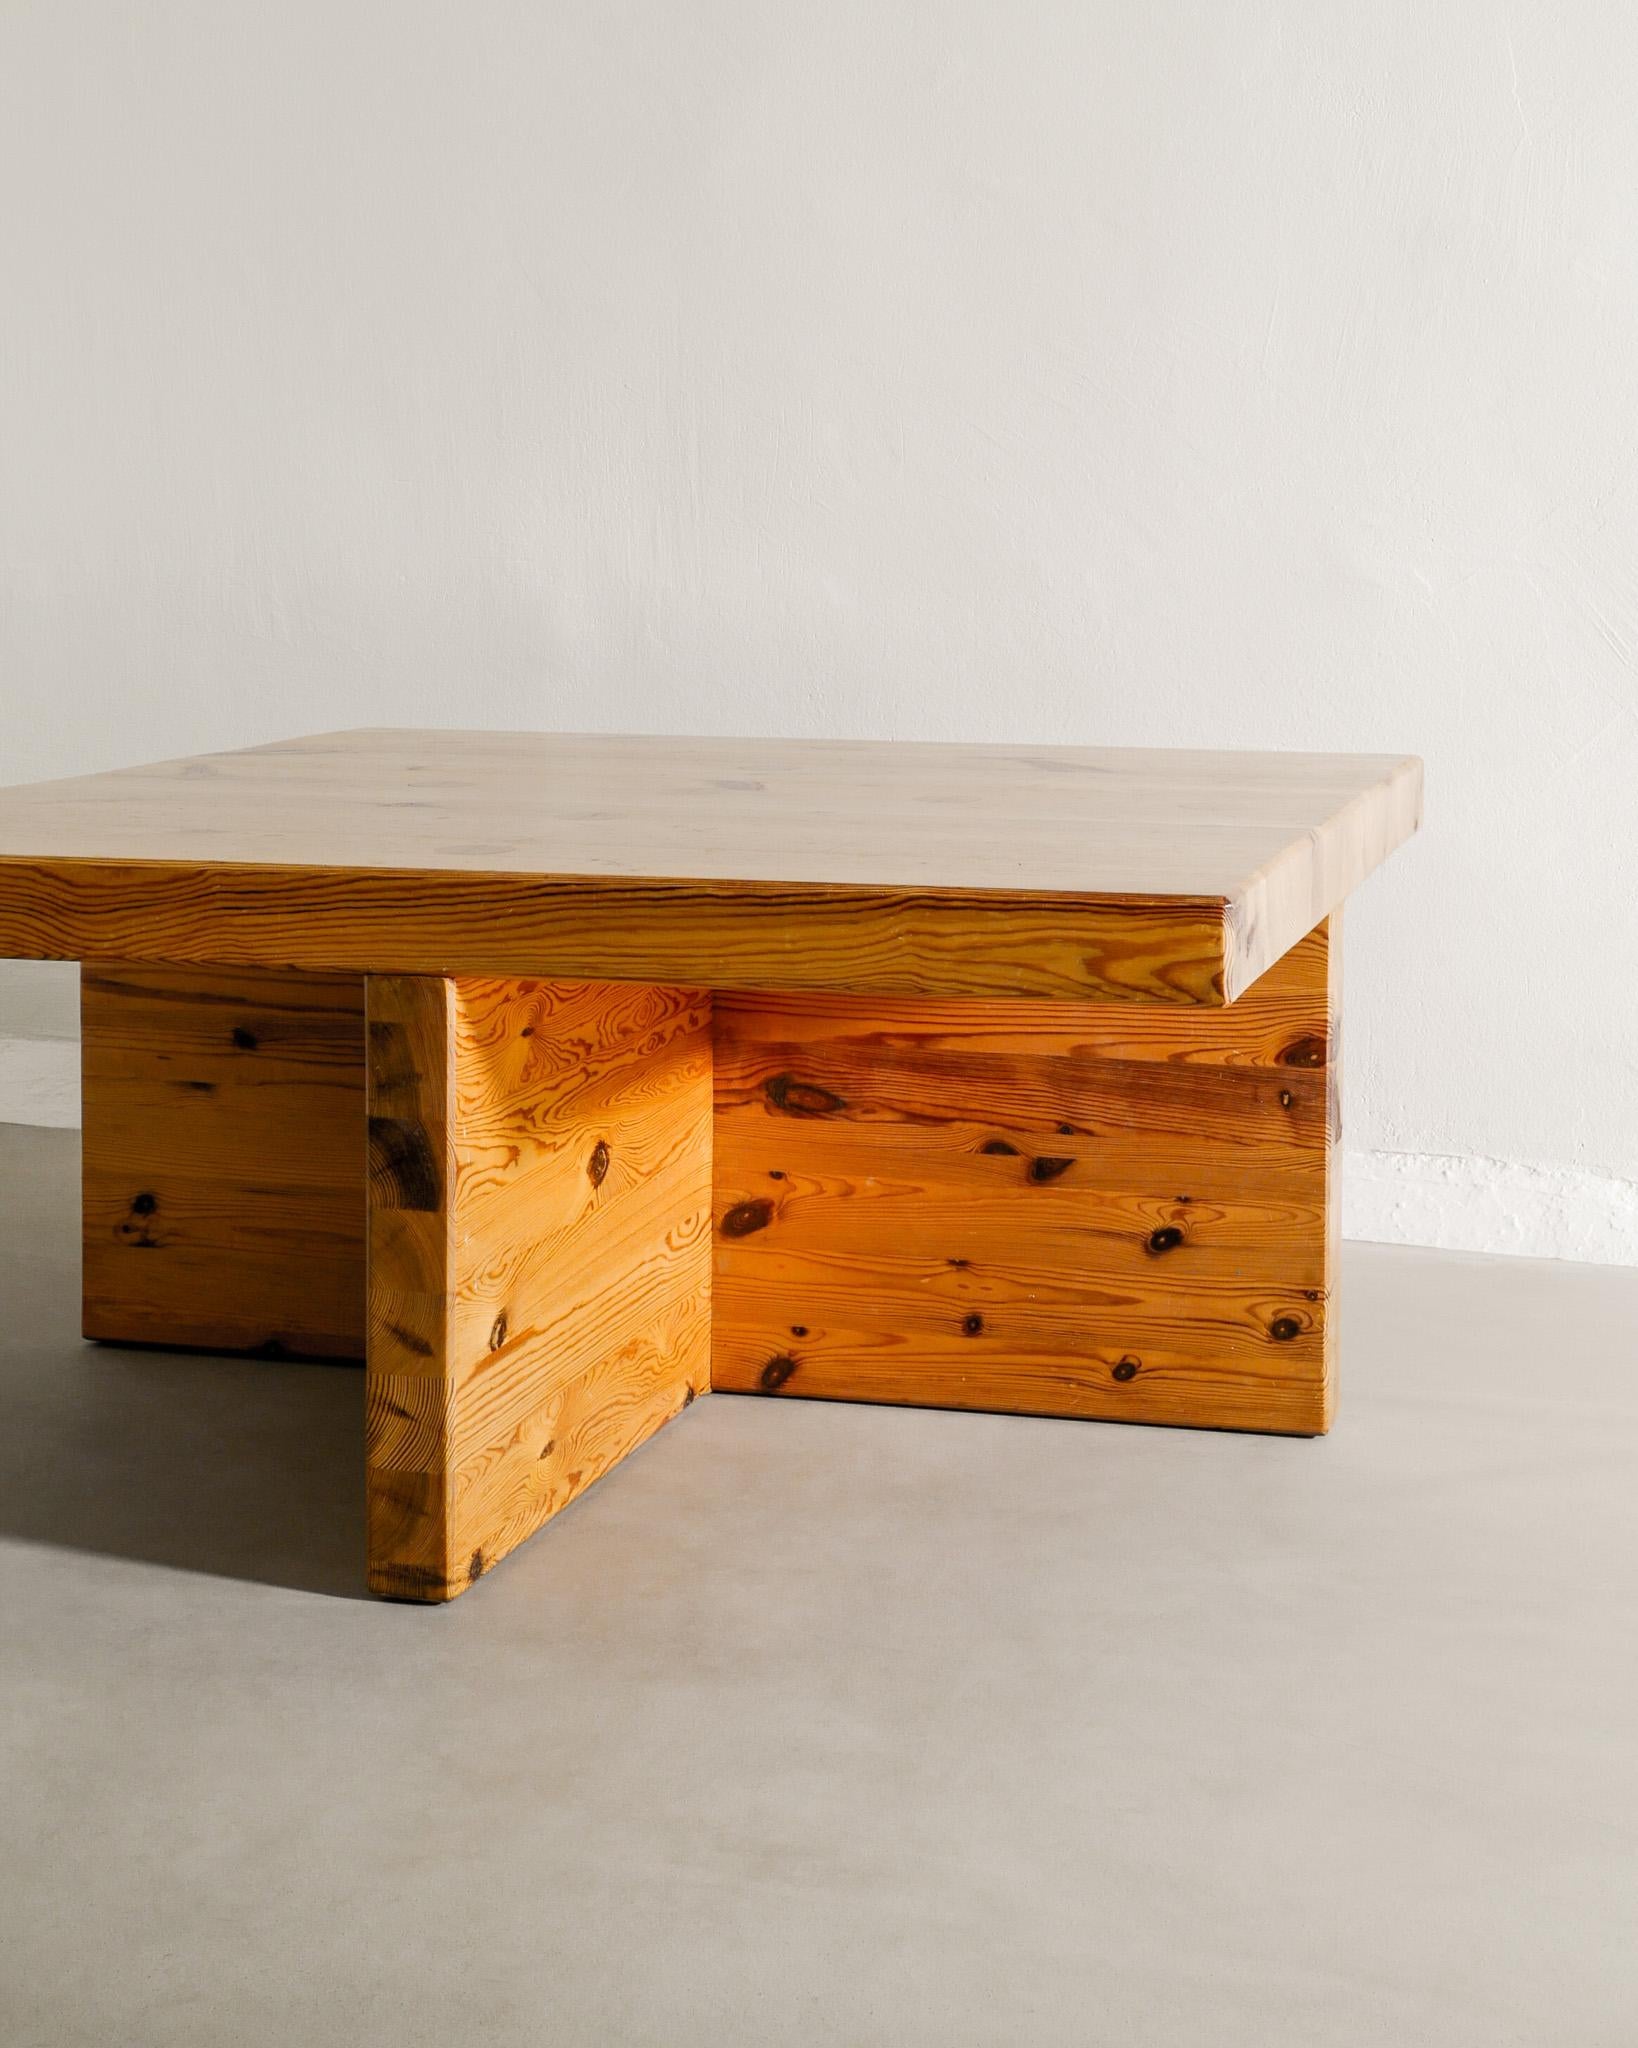 Scandinavian Modern Squared Coffee Sofa Table in Solid Pine by Sven Larsson Produced in Sweden 1970s For Sale